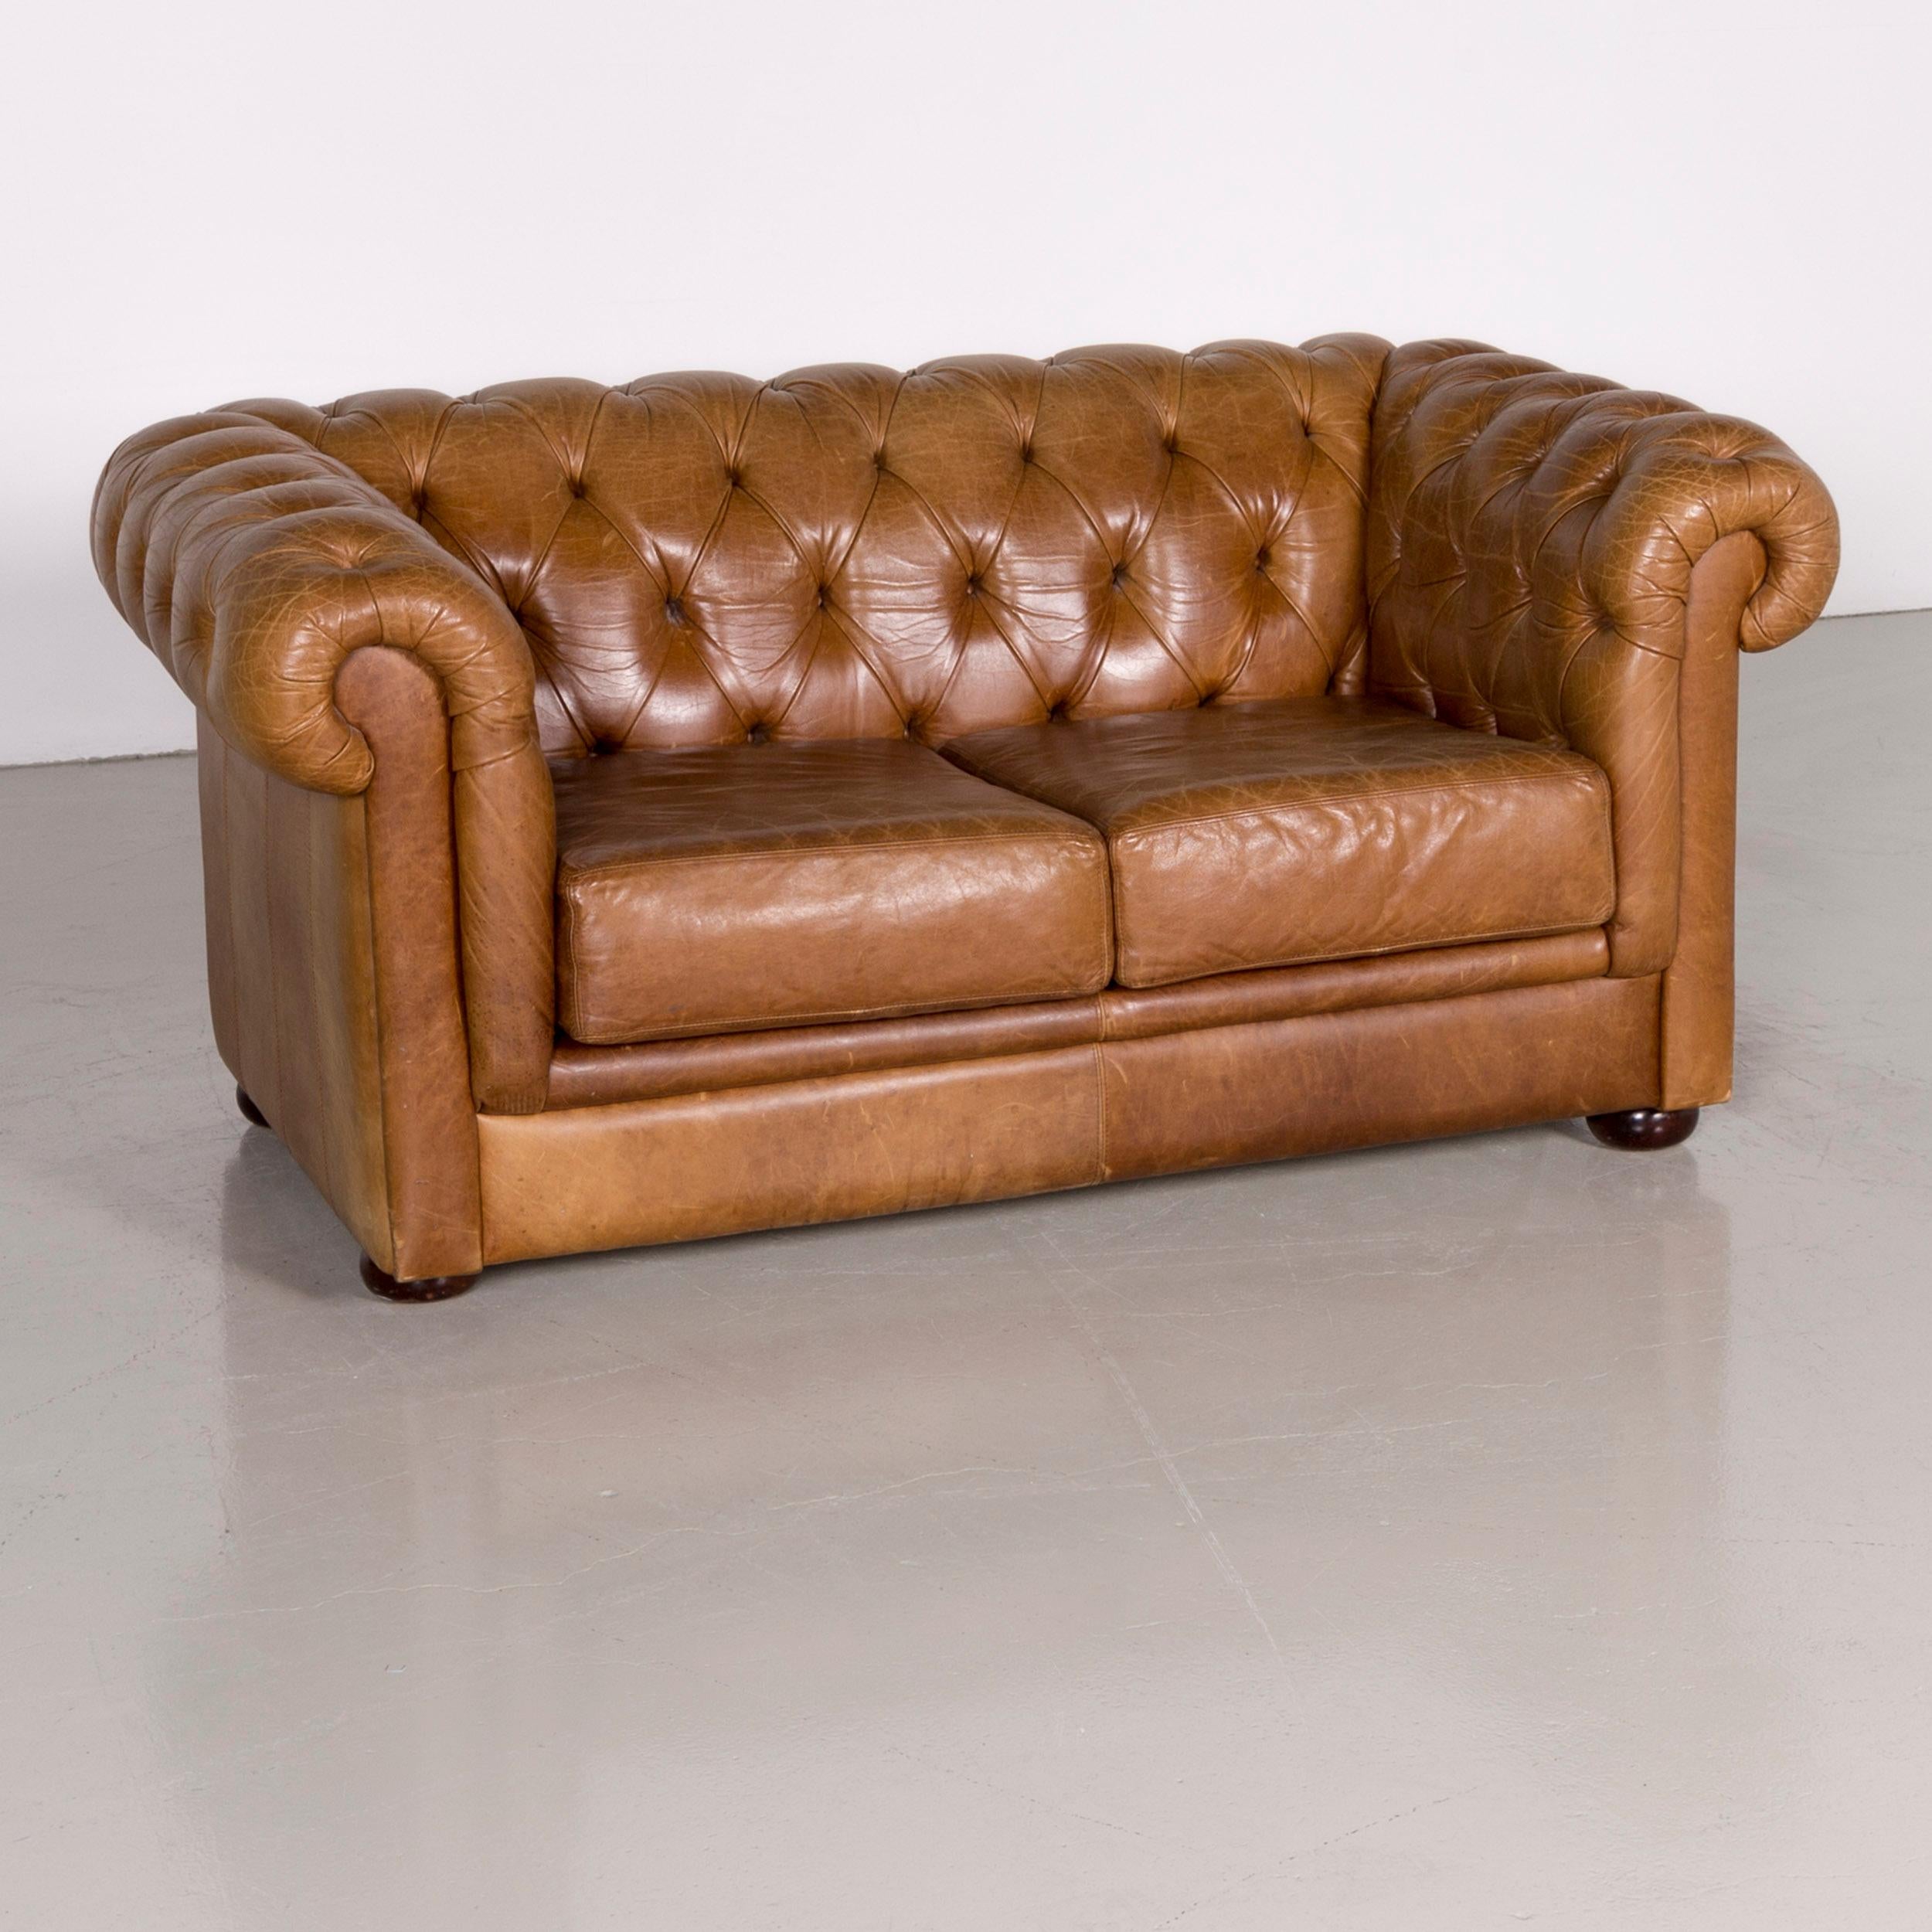 Chesterfield Leather Sofa Armchair Set Brown Red Vintage Two-Seat Couch In Fair Condition For Sale In Cologne, DE